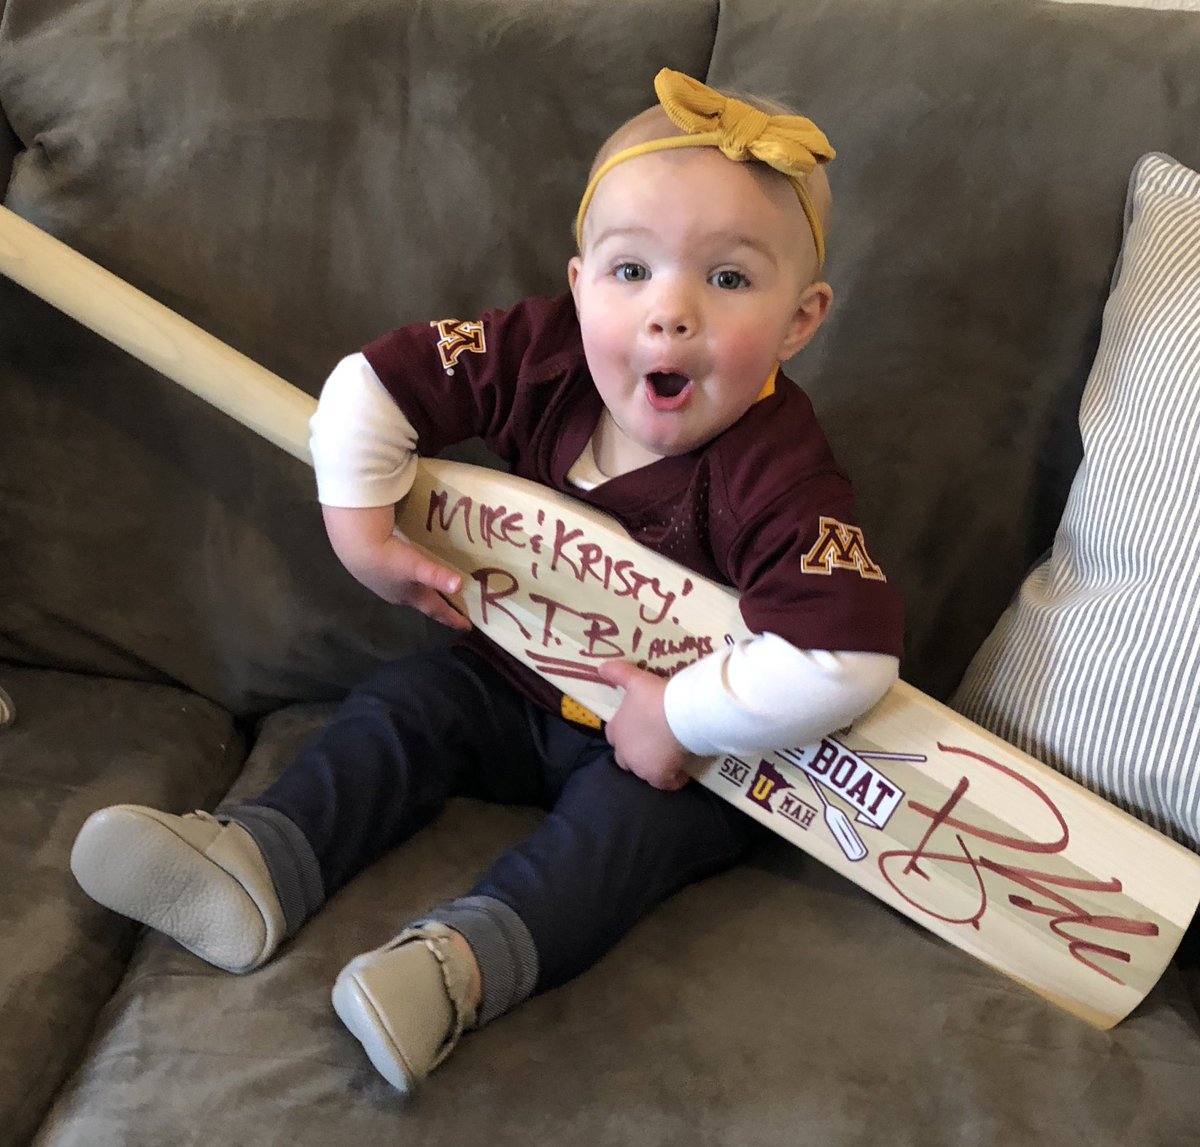 A special thank you to @Coach_Fleck  and @GopherFootball staff for taking the time to brighten our day! Anika can’t wait to share the oar with her #nicustrong brothers Finn and Luca! Triplet Gabriel guiding our boat from heaven 〽️🕊🚣🏼‍♀️ #rowtheboat #skiumah #gogophers @GopherWGym